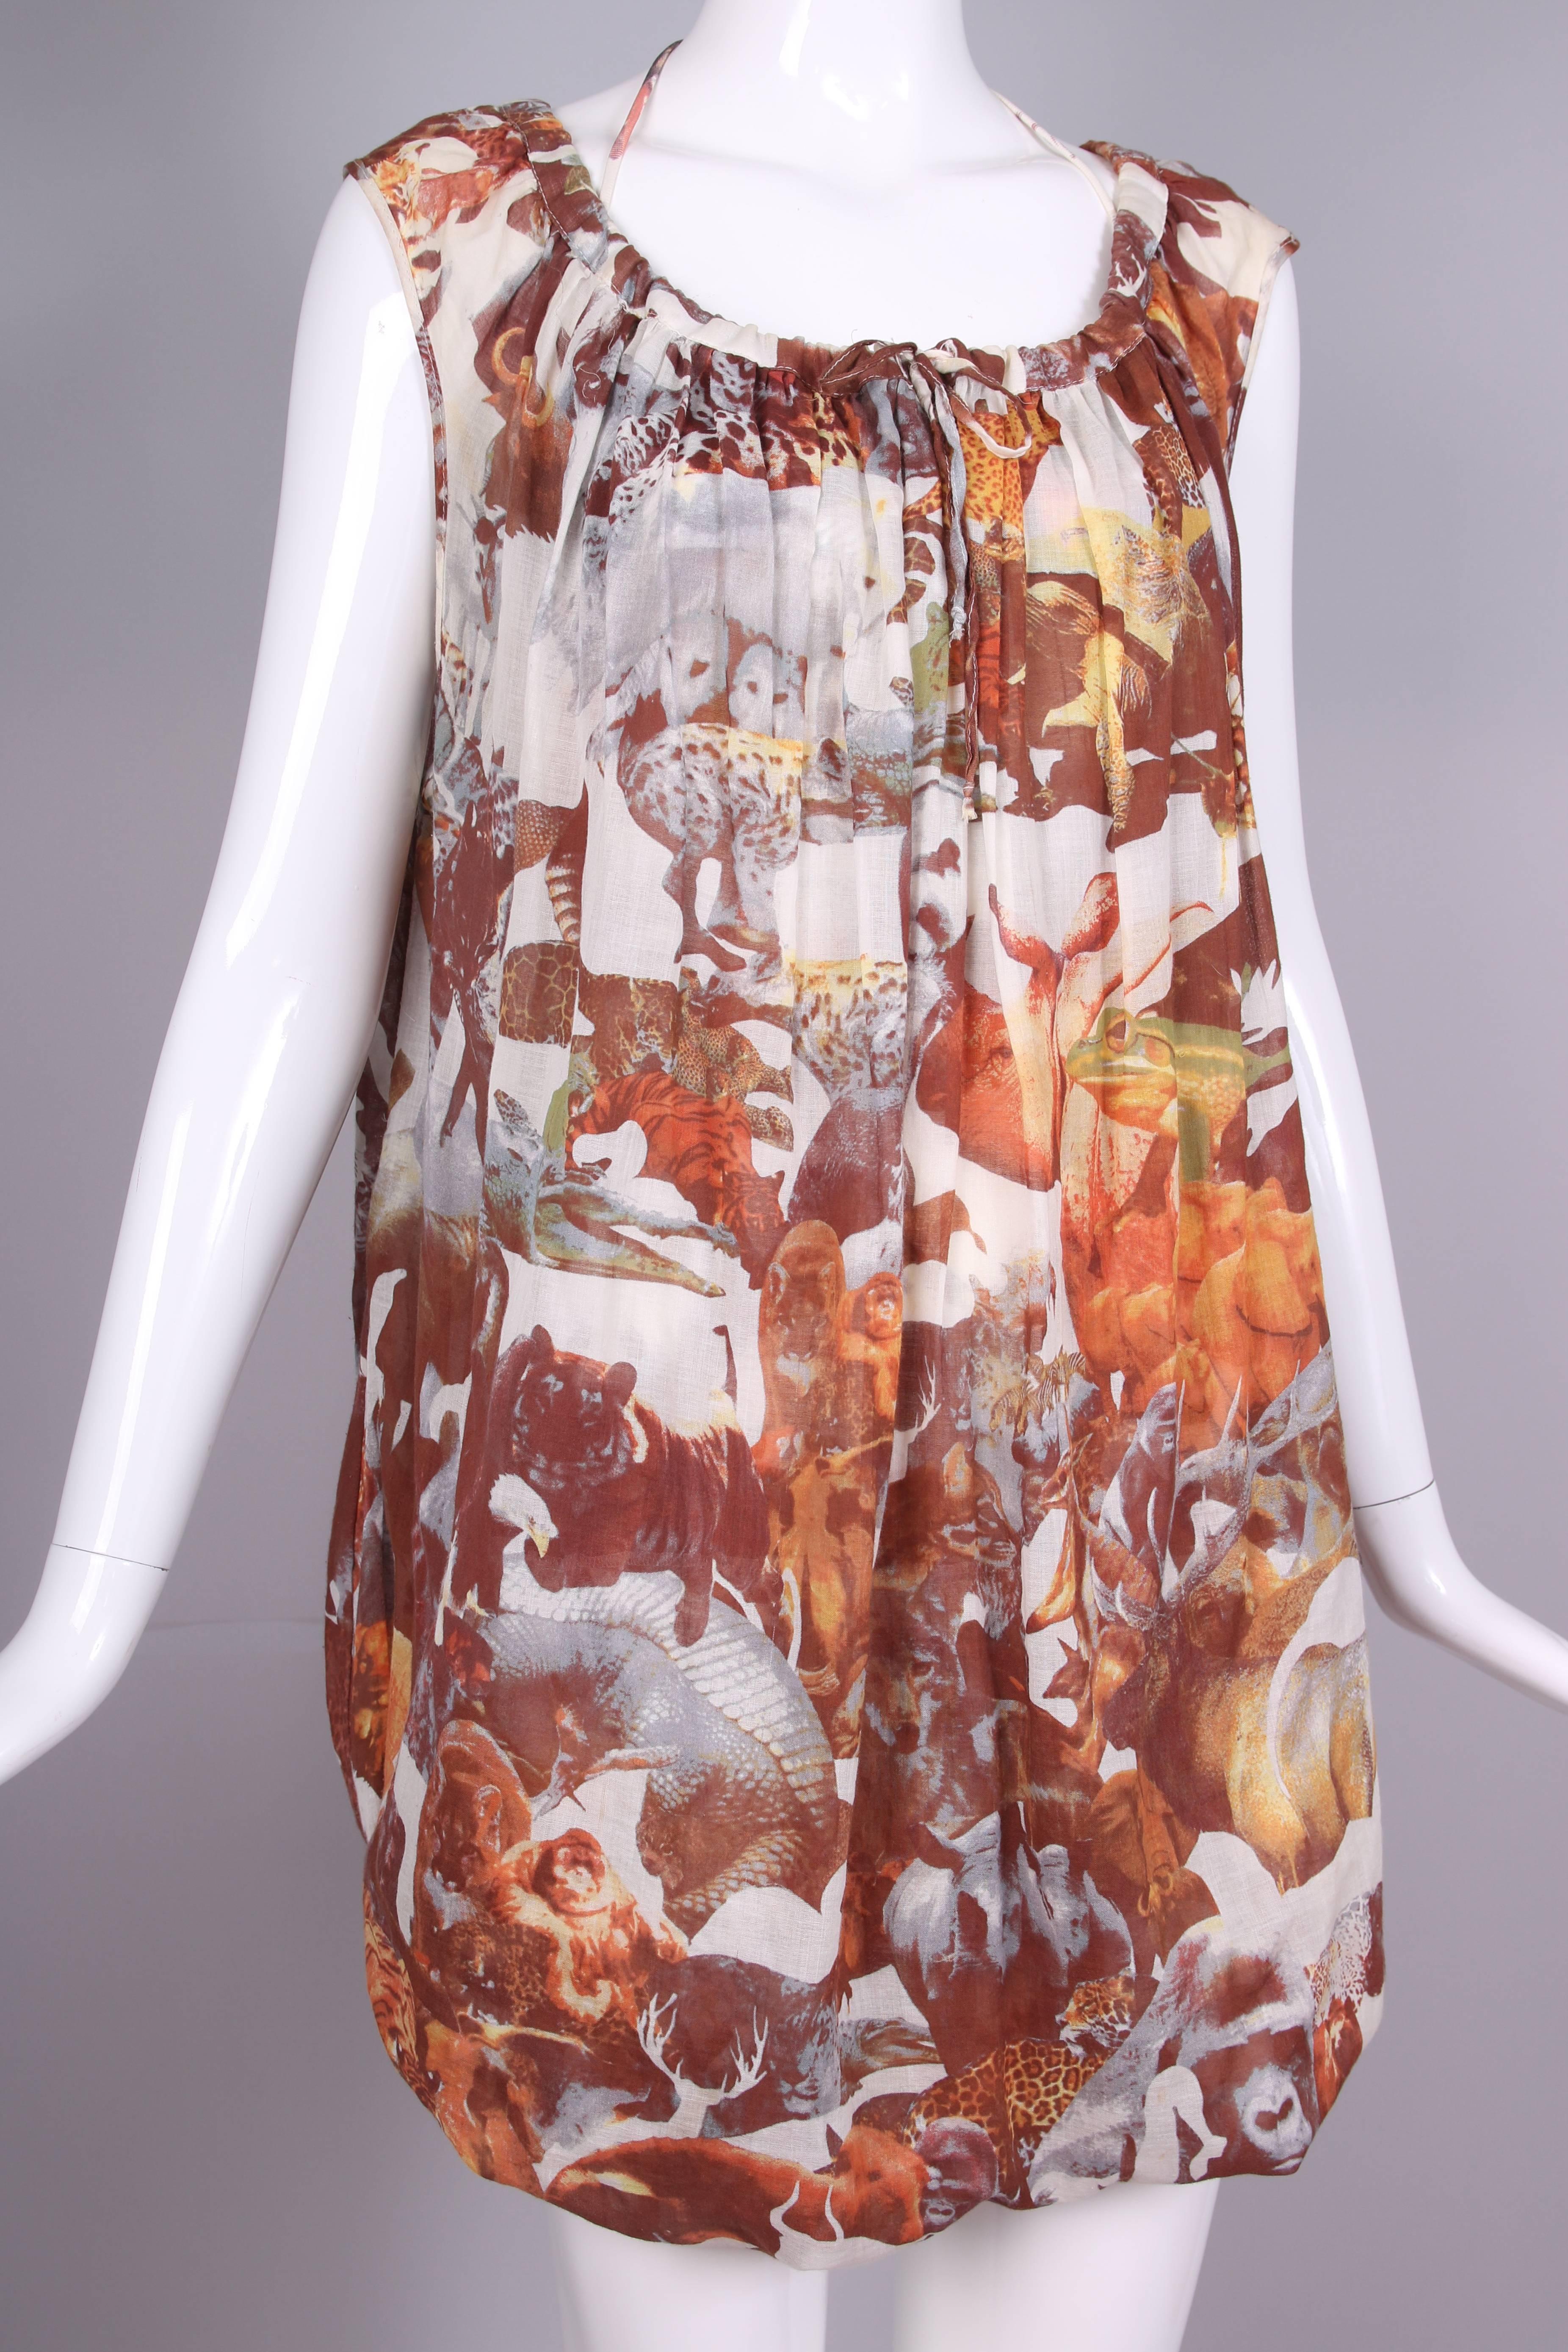 Hussein Chalayan Cotton Jungle Print Sleeveless Summer Dress In Excellent Condition For Sale In Studio City, CA